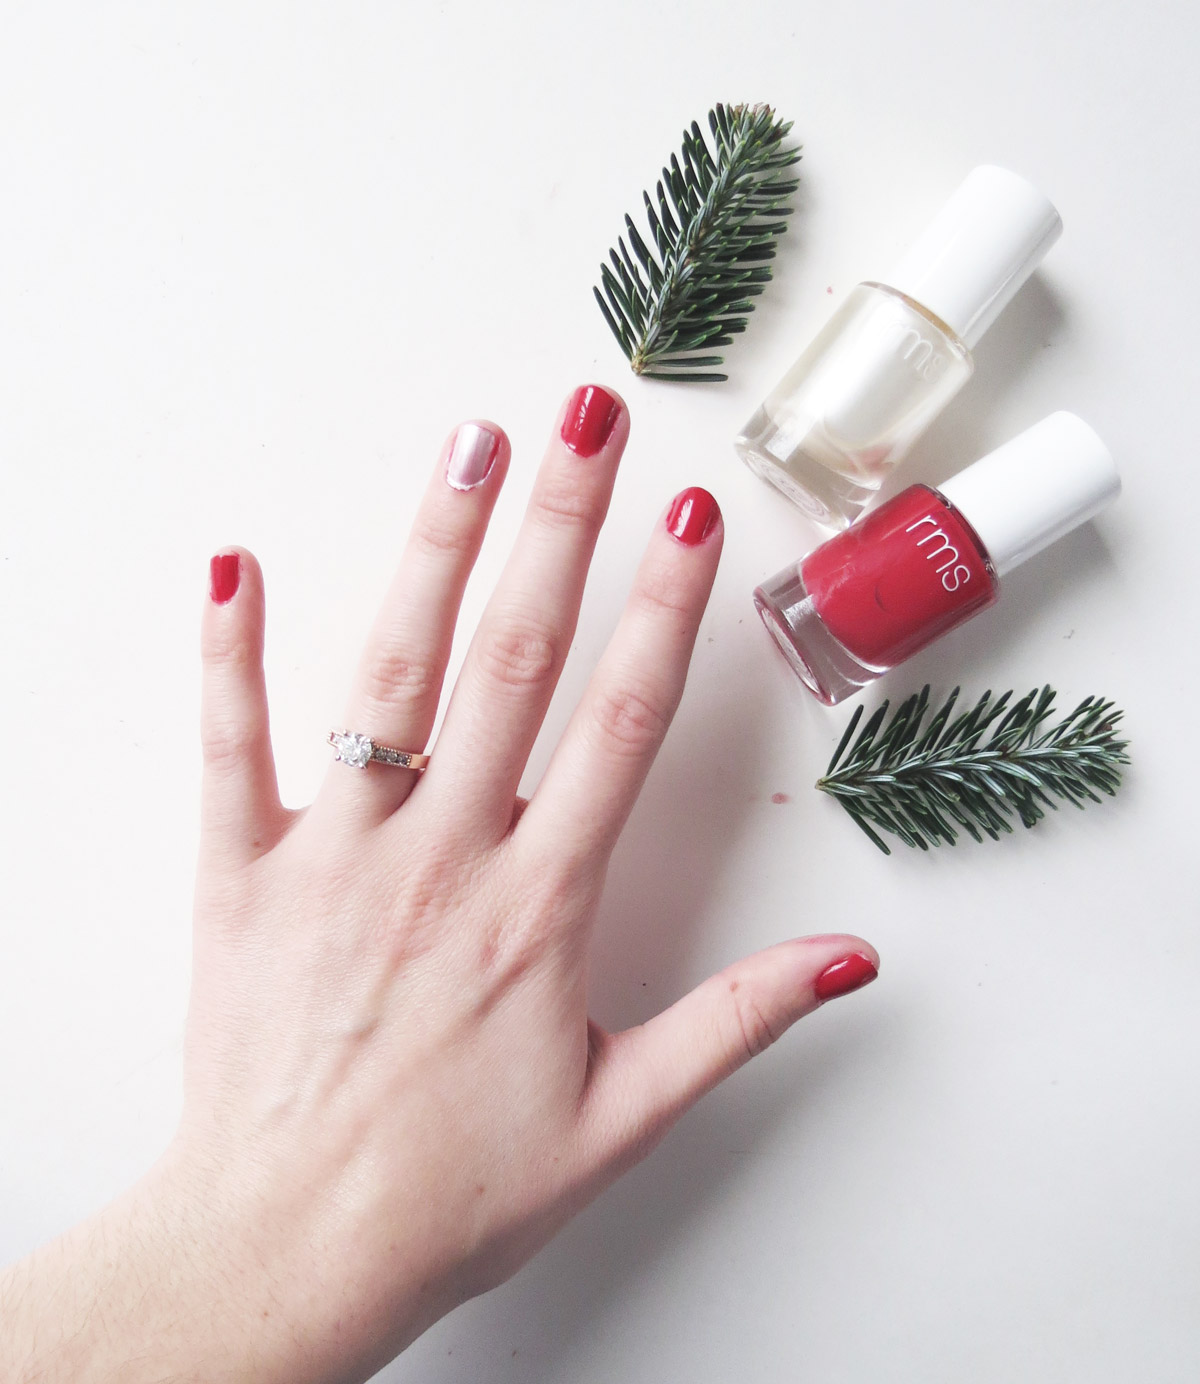 Hypoallergenic Nail Polish: 10 Options to Try